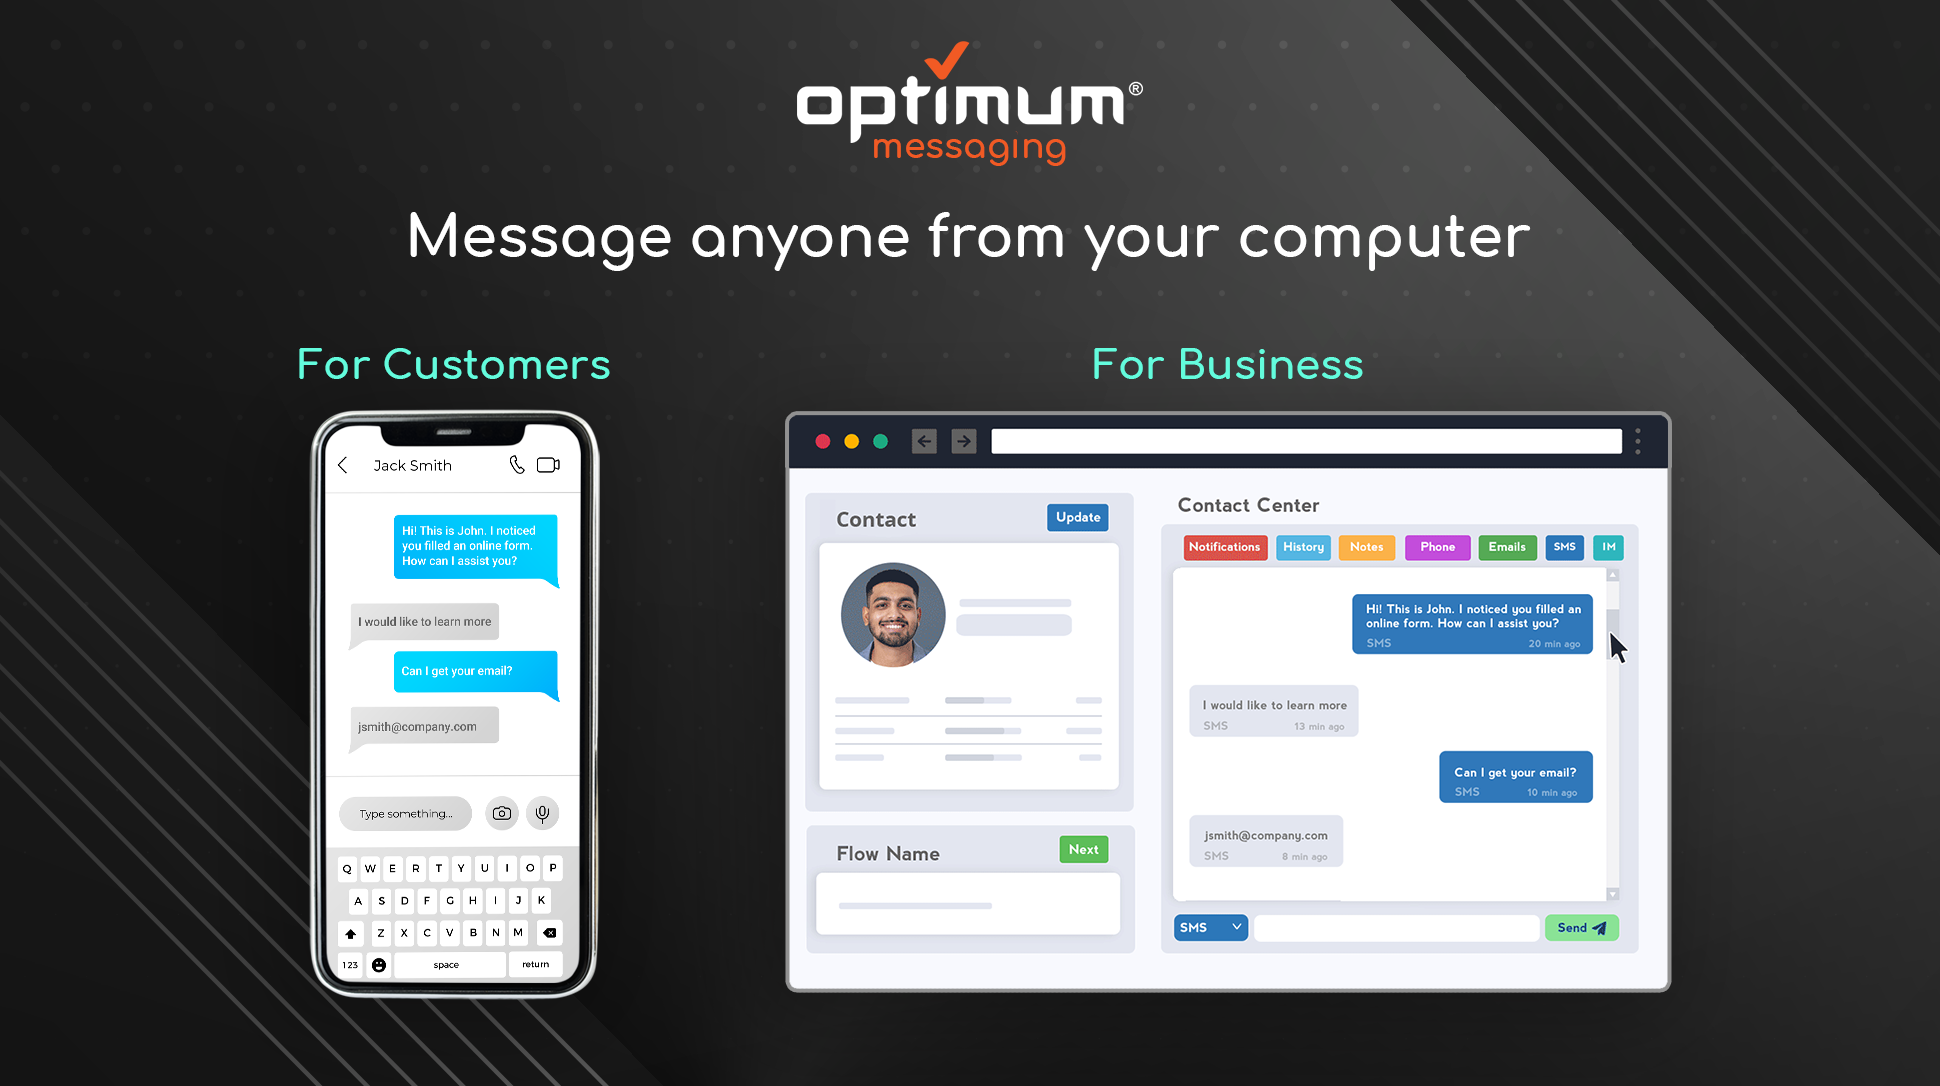 Easily manage multiple communication channels in one place for customers and prospects alike.  Enhance your brand with personalized and responsive messaging for all communication preferences.